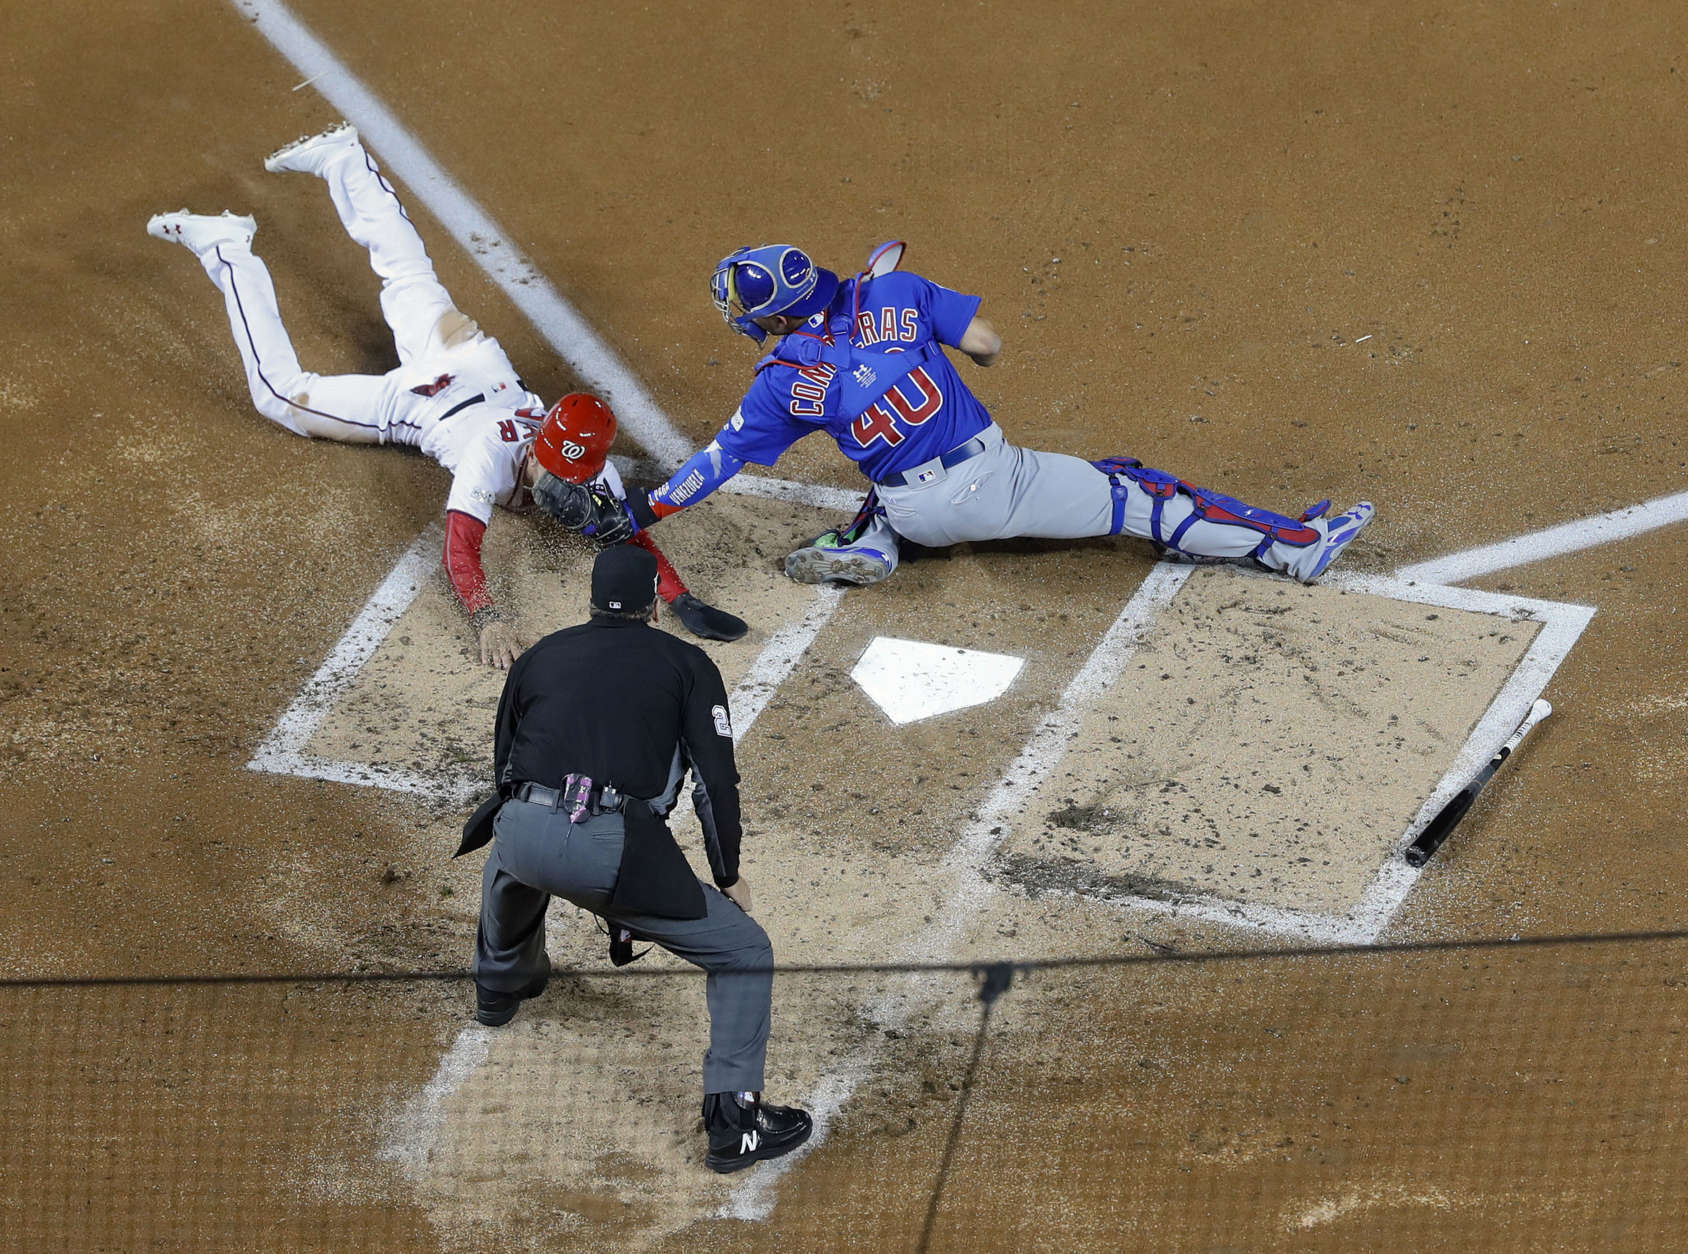 Chicago Cubs catcher Willson Contreras (40) tags out Washington Nationals Trea Turner (7) at home on a infield grounder by Bryce Harper during the first inning of Game 5 of baseball's National League Division Series, at Nationals Park, Thursday, Oct. 12, 2017, in Washington. Behind the plate is umpire Jerry Lane.  The Cubs won 9-8. (AP Photo/Pablo Martinez Monsivais)